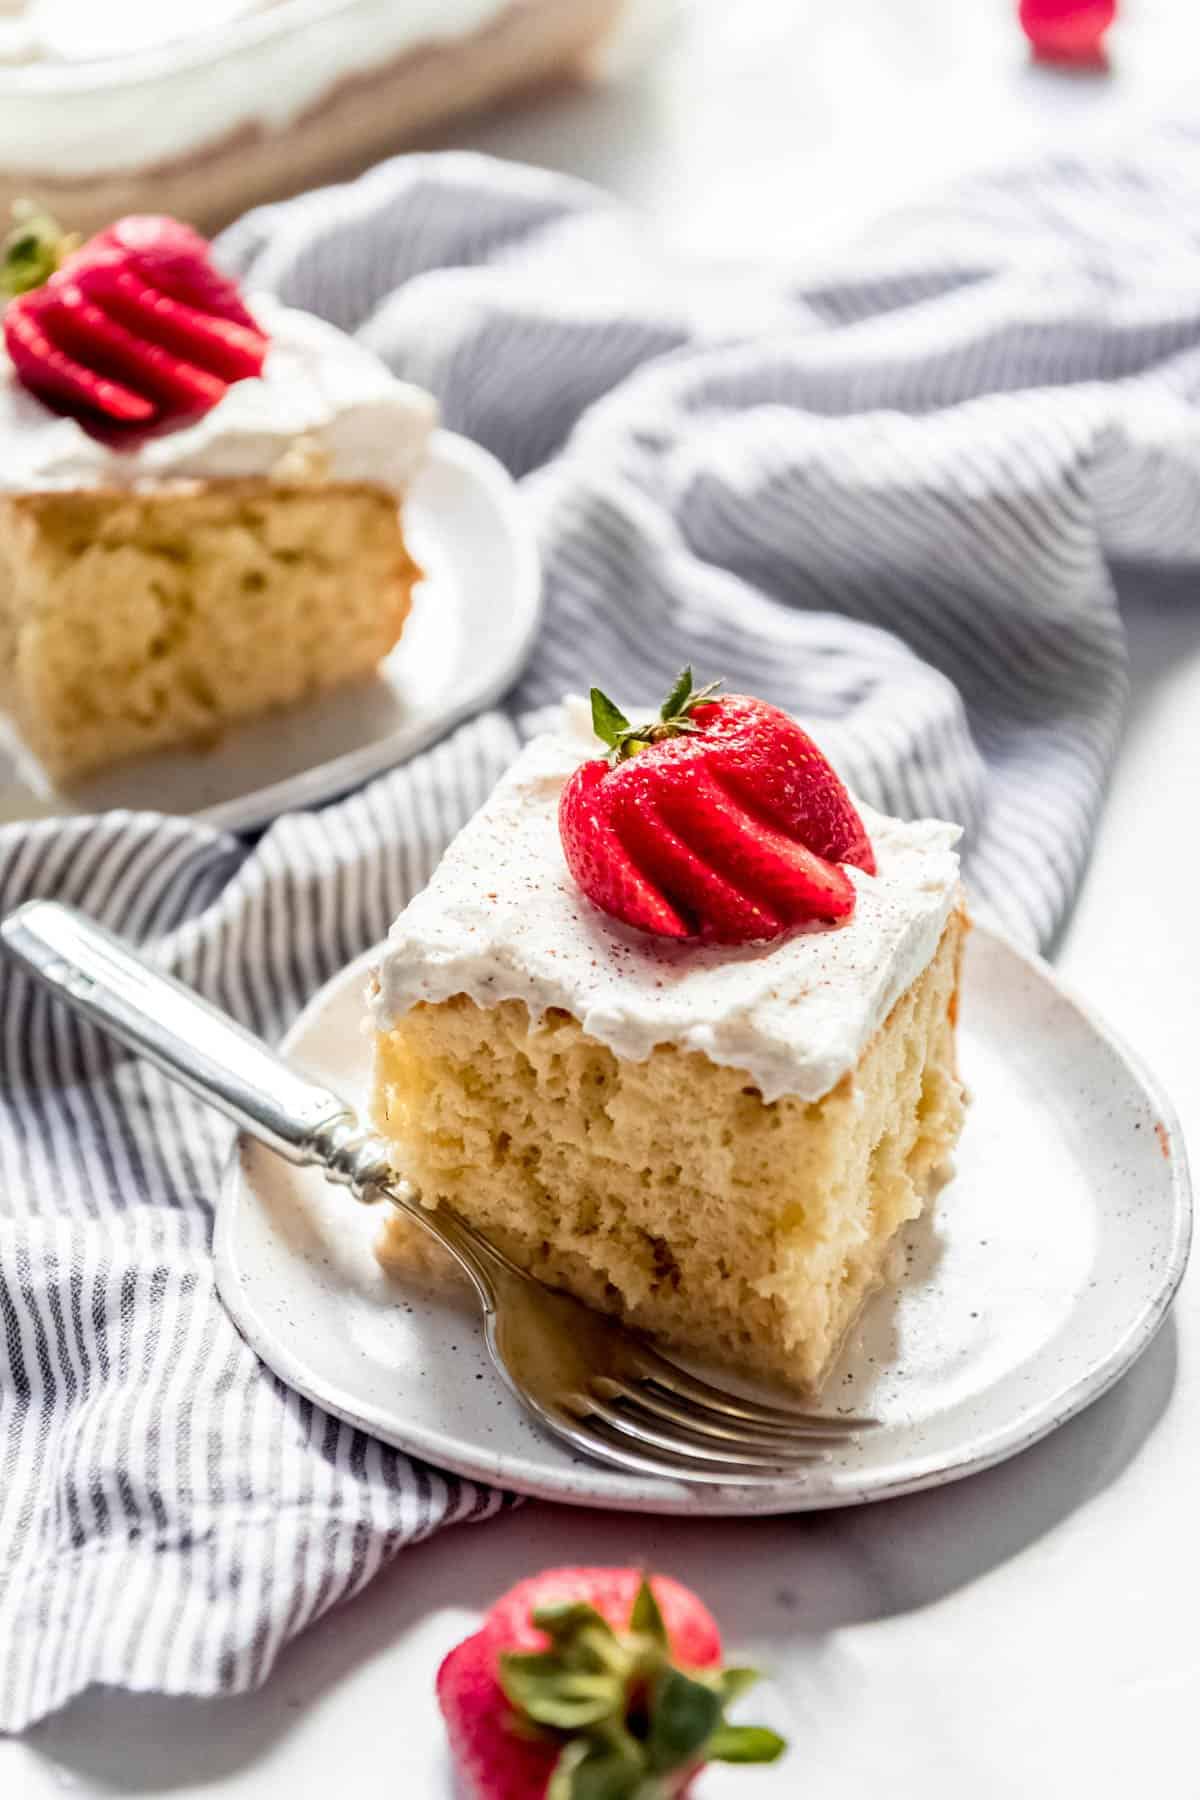 Sliced and frosted squares of tres leches cake on plates with fanned strawberries as garnish on top.